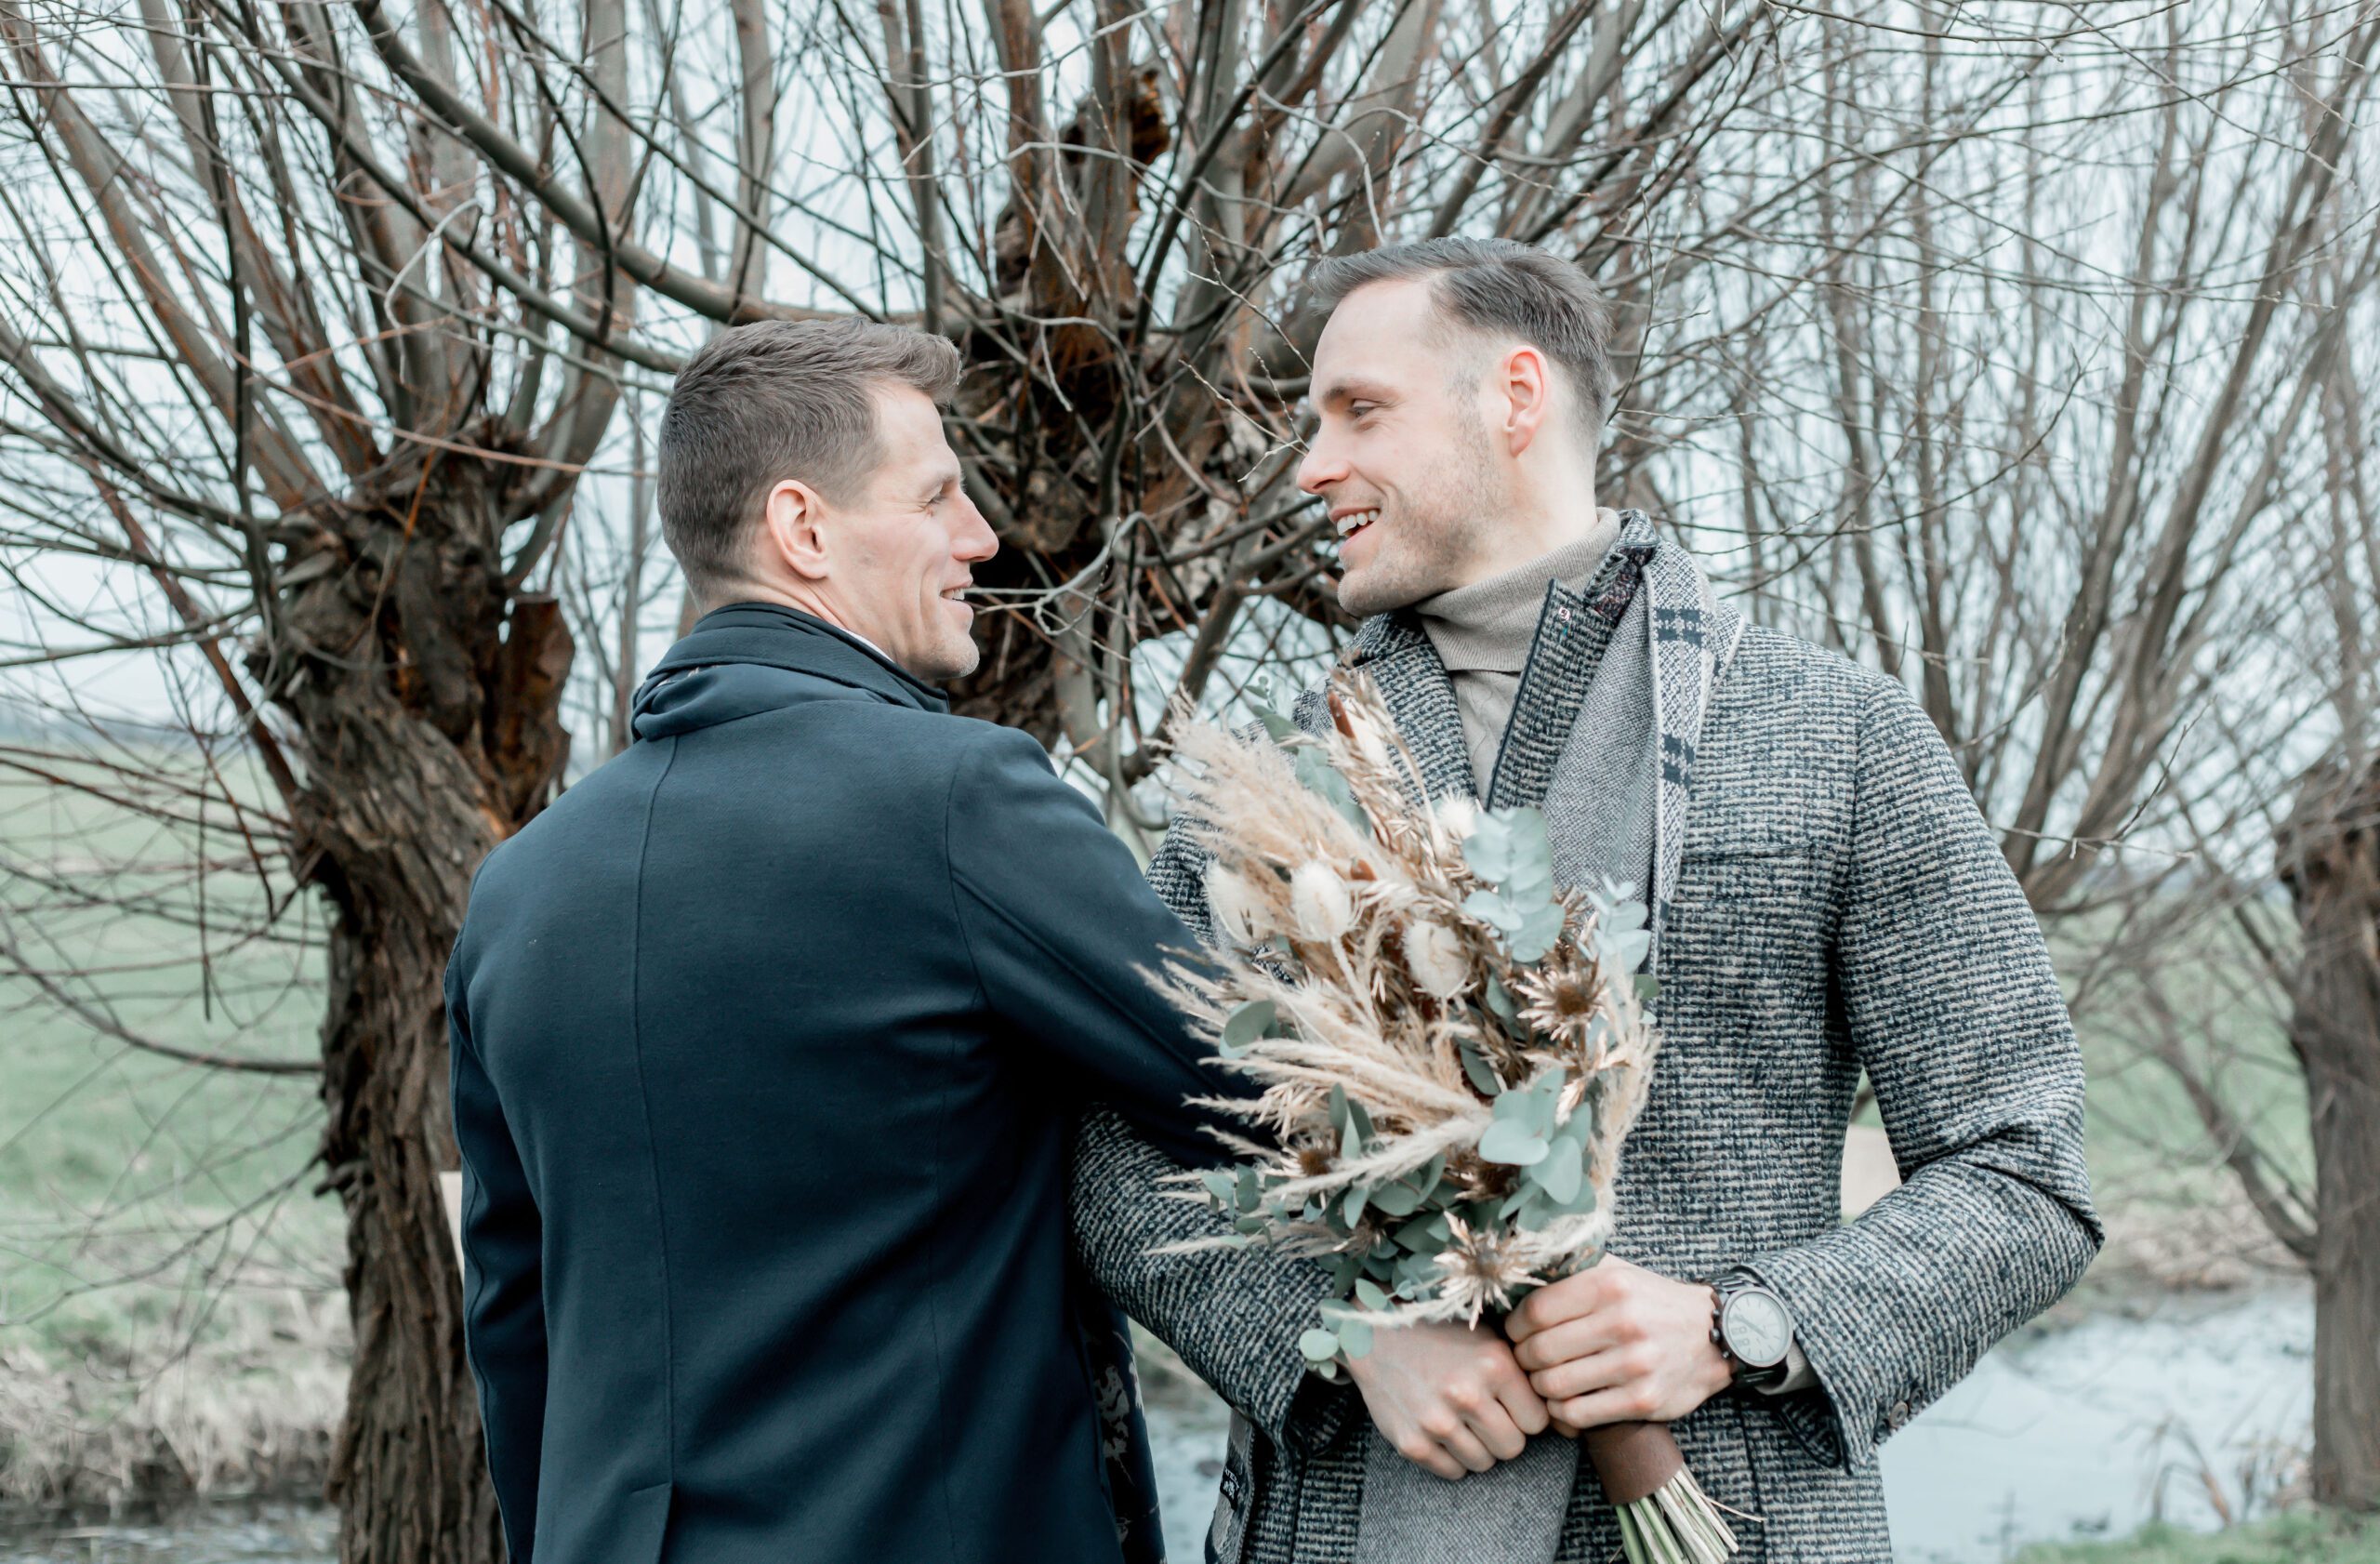  Eloping wedding for gay couples